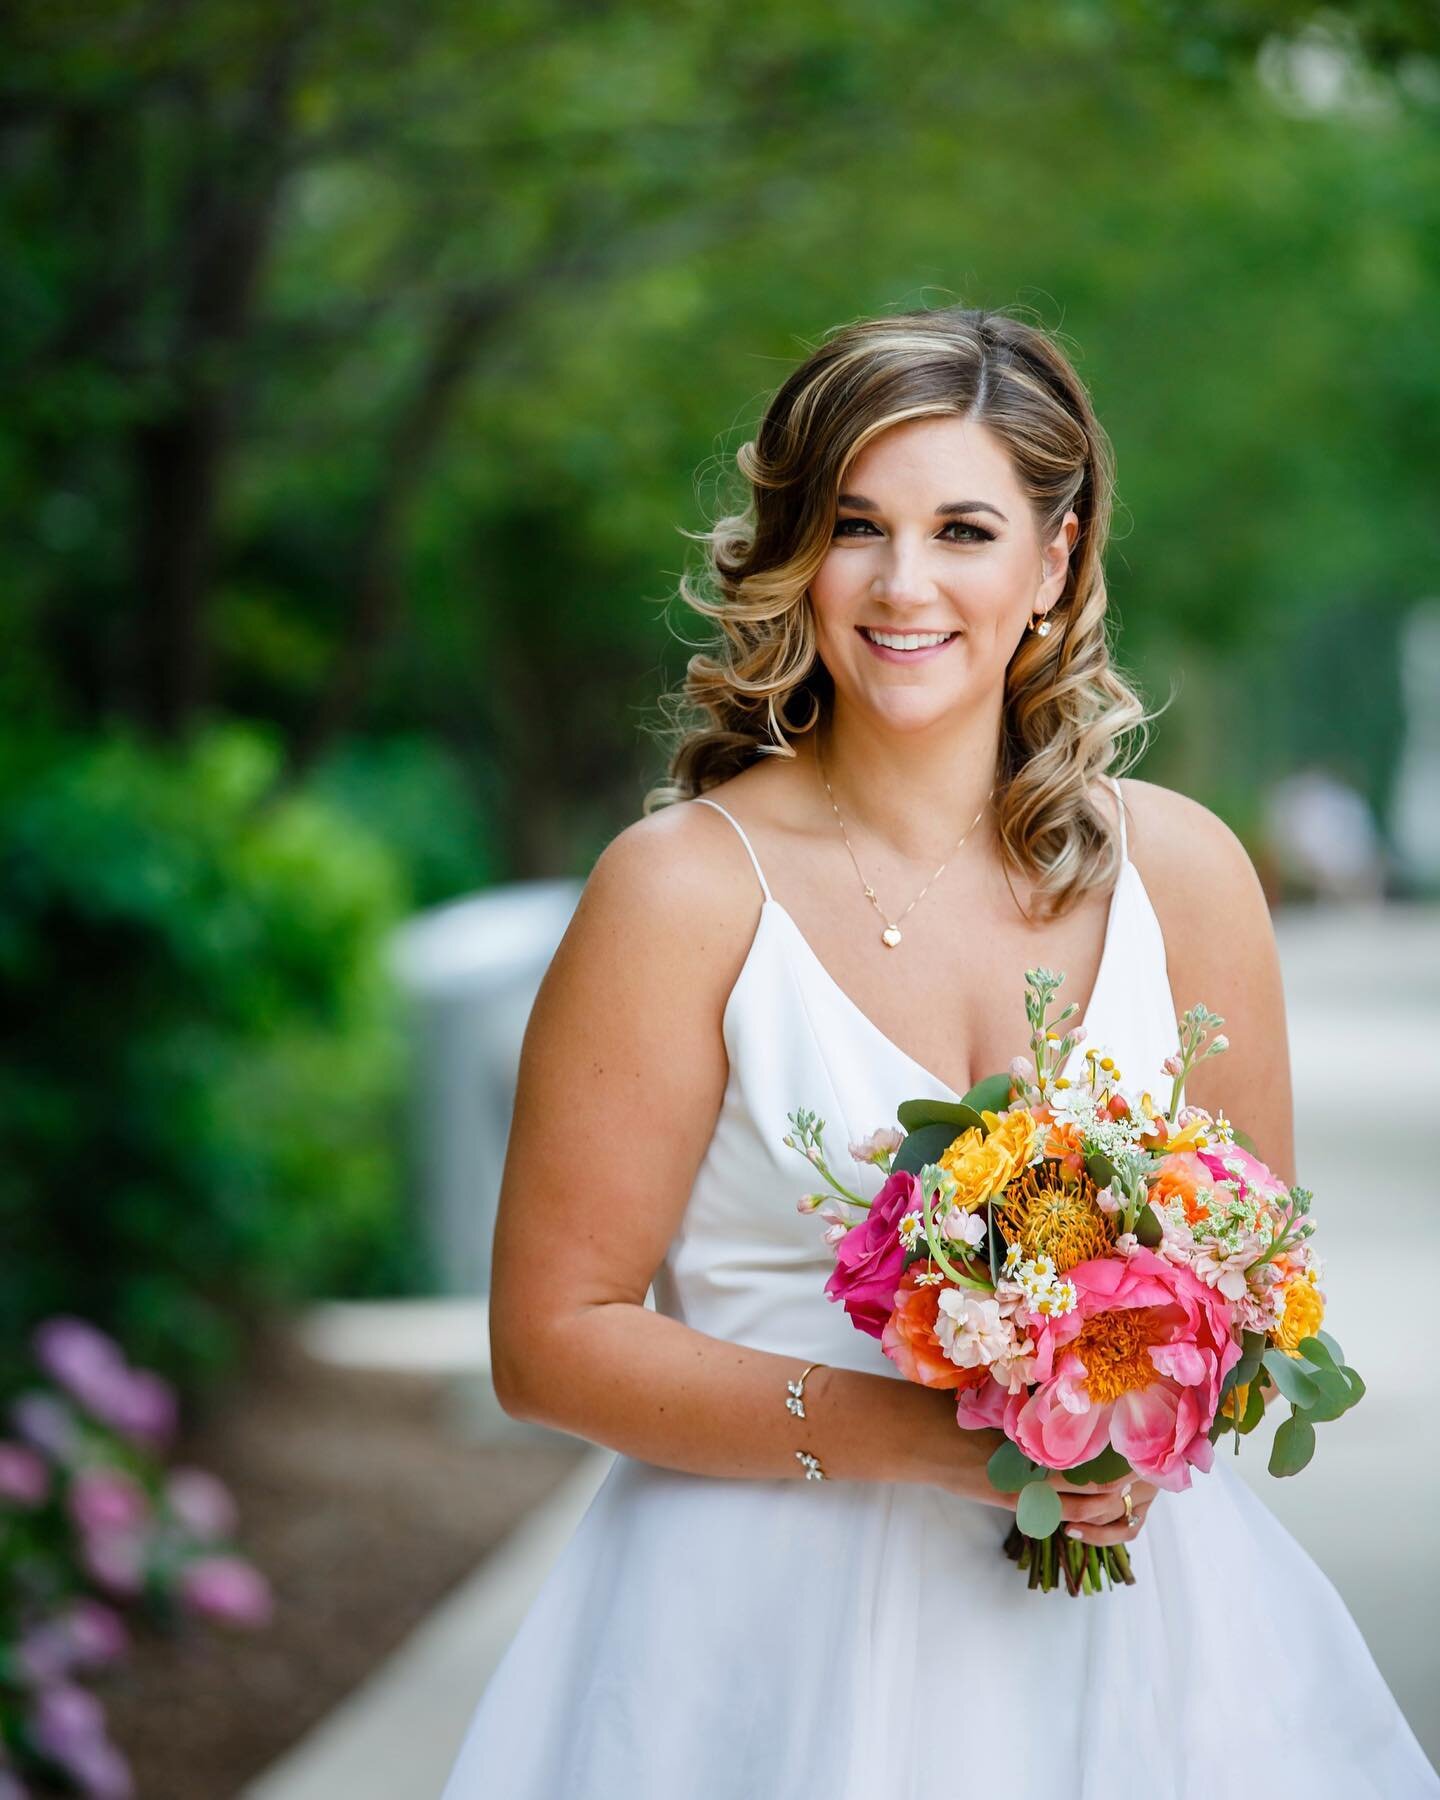 Now taking bookings for 2024 wedding season. Click the link in bio to send an inquiry. Still have availability for 2023, Saturdays are limited. 

Photographer: @featherprintmedia 
Makeup for @goldenbridaldesign 
Hair: Katie w/ @goldenbridaldesign 
Bo